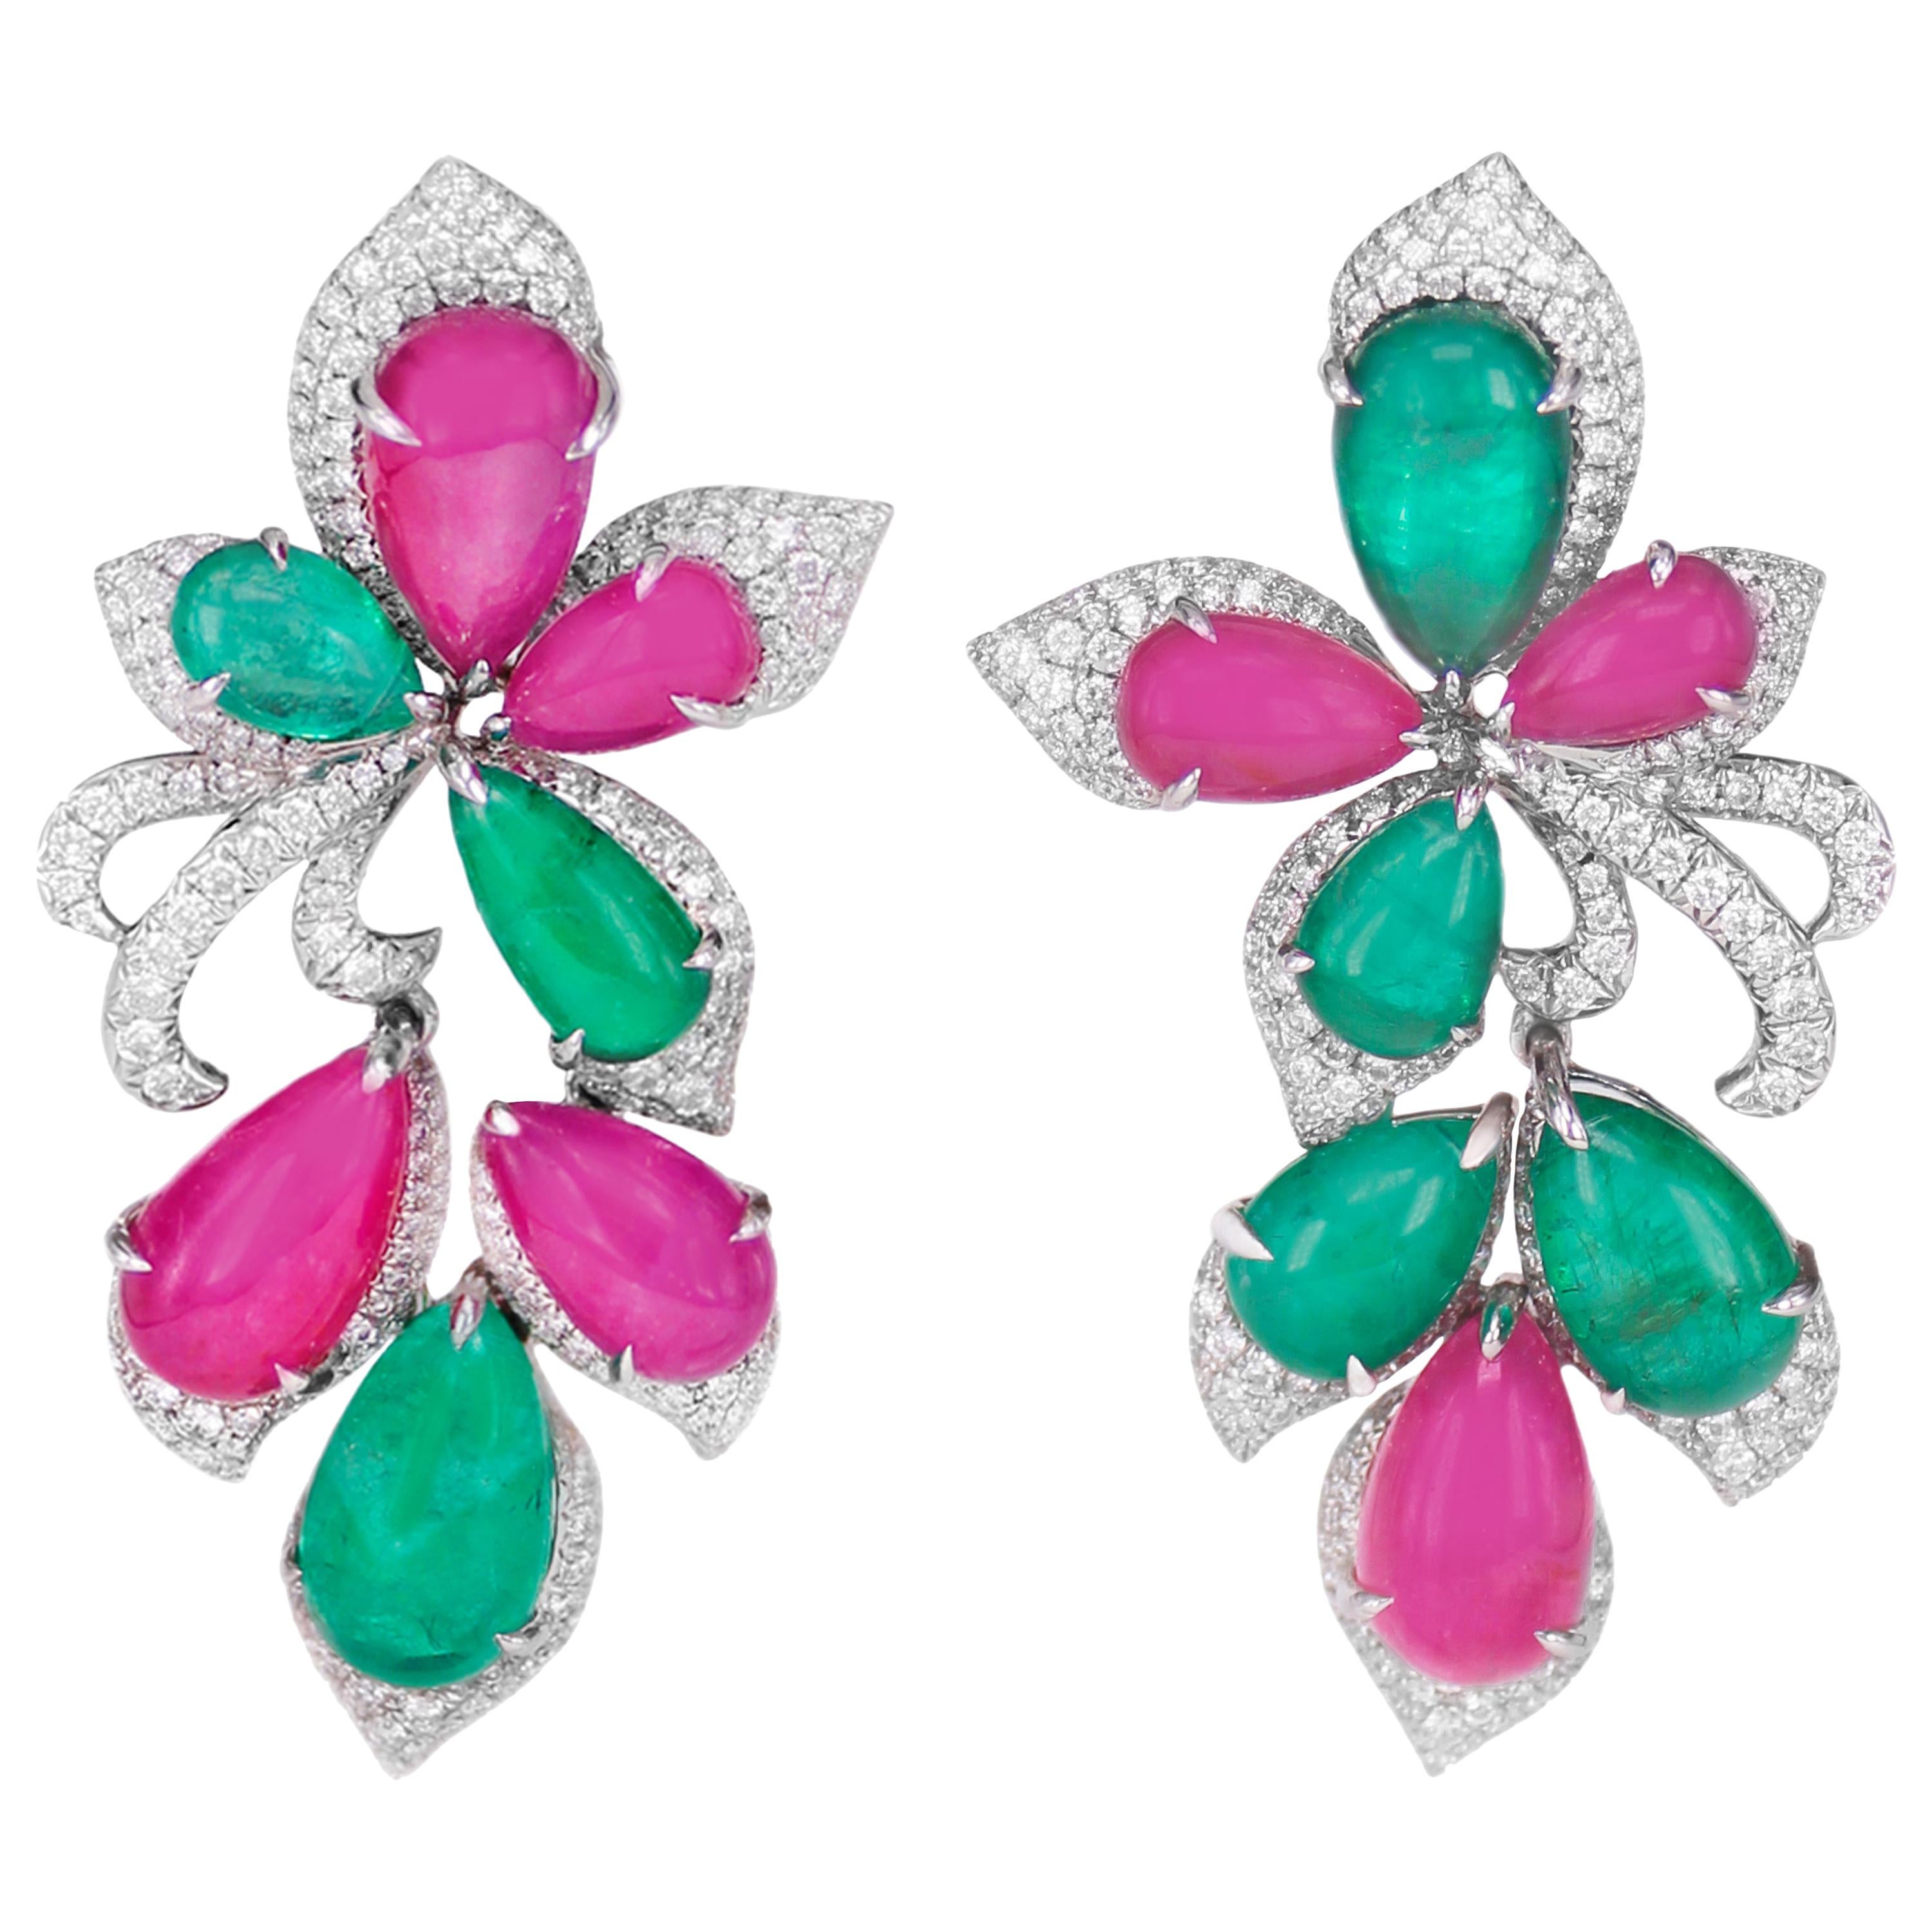 29 Carat Ruby and 17 Carat Emerald Chandelier Earring